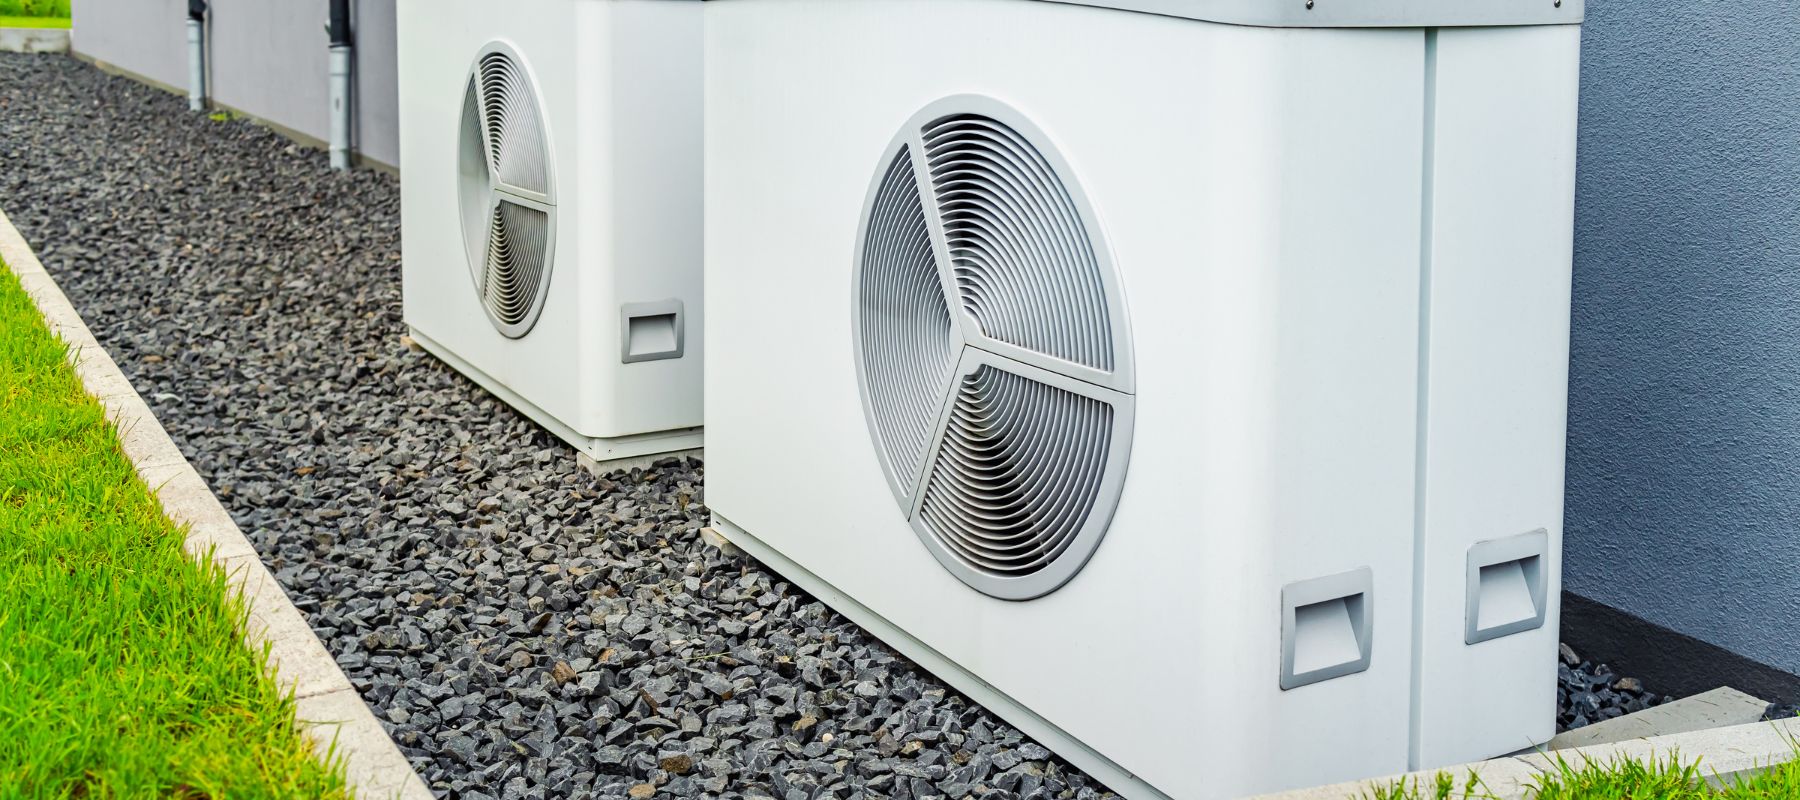 Two large, white external HVAC units with prominent circular fans are positioned on a bed of gray gravel next to a building, bordered by a well-maintained grassy area. The design suggests a modern and efficient air circulation system for climate control within the premises